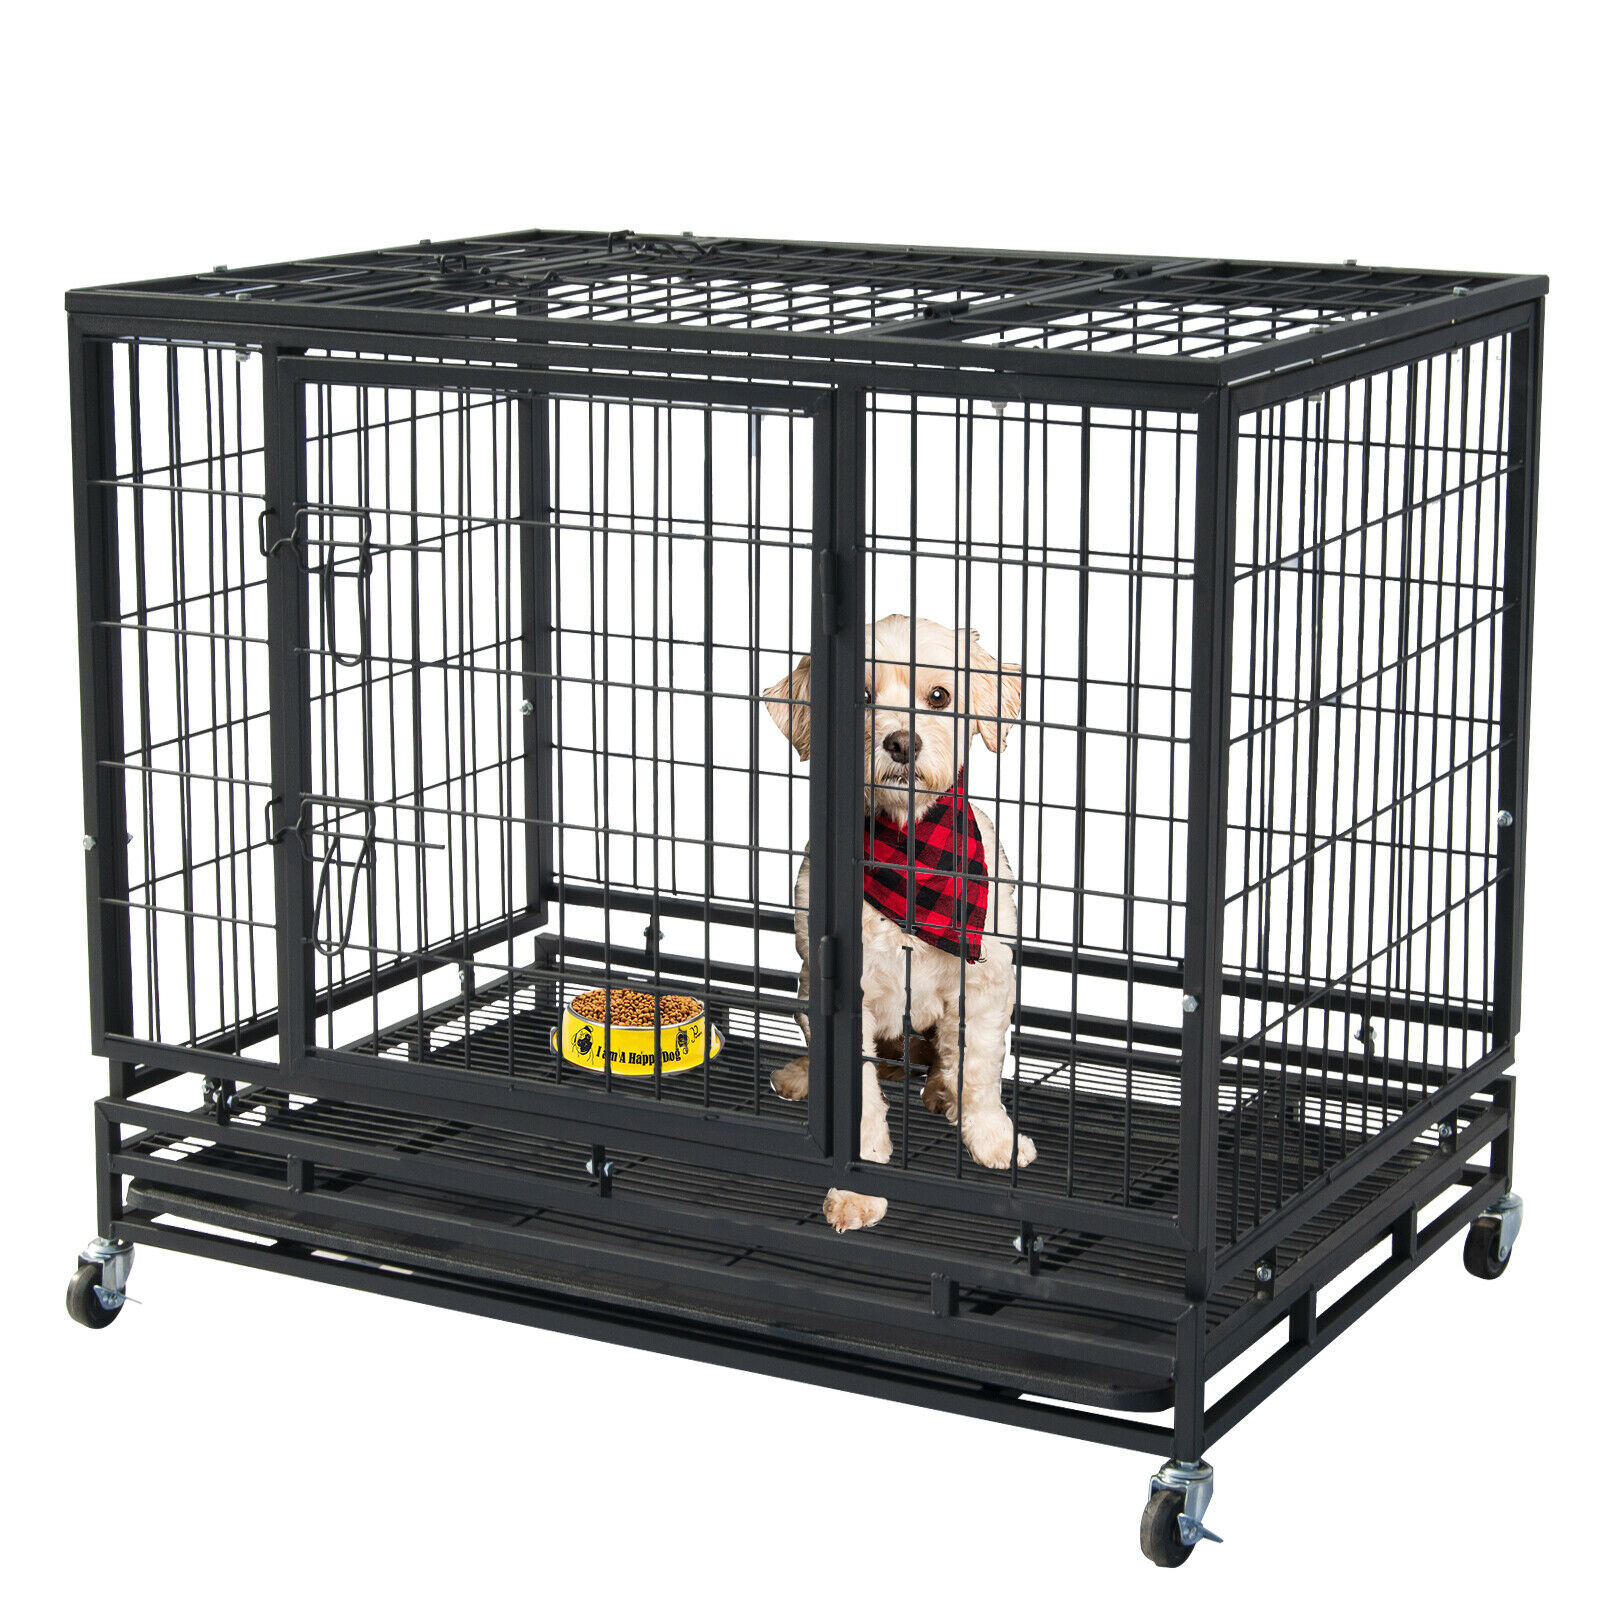 37" Pet Dog Cage Heavy Duty Strong Metal Wire Crate Kennel Playpen For Training